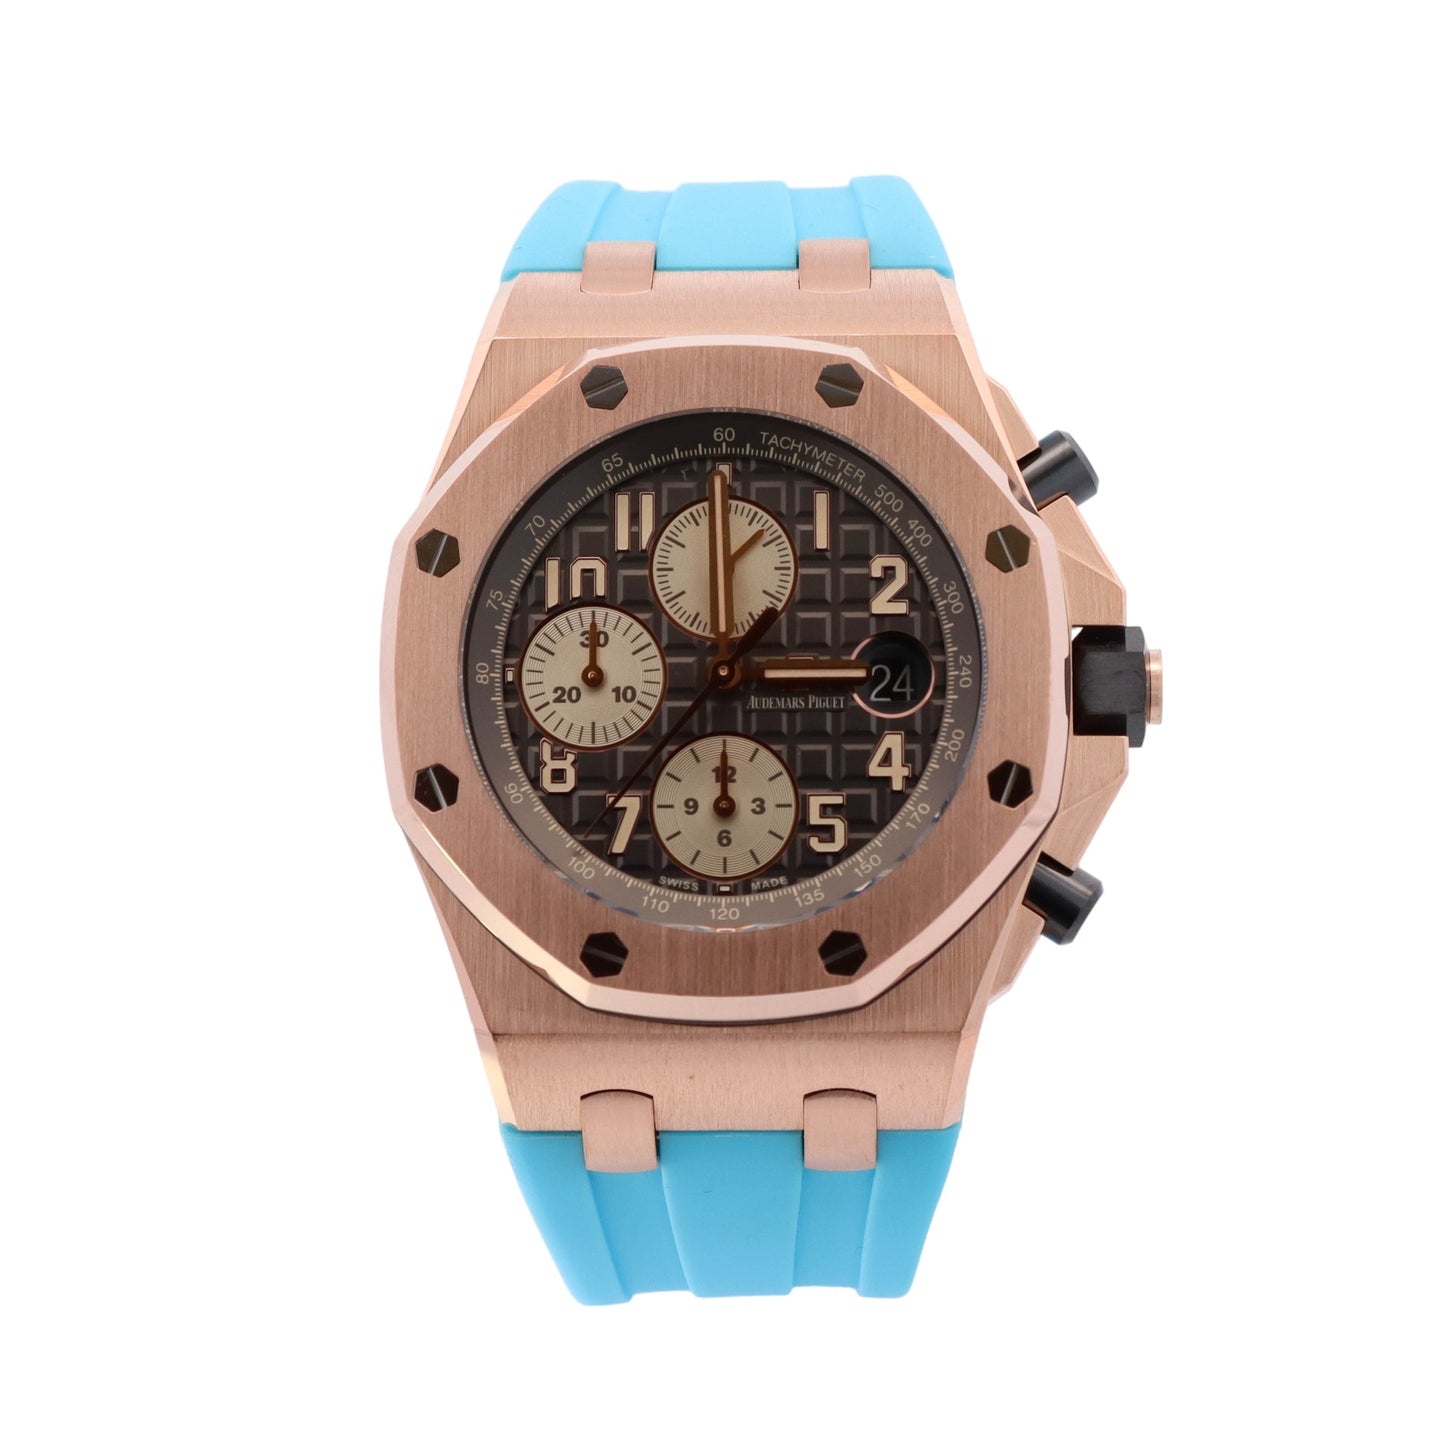 Audemars Piguet Royal Oak Offshore Rose Gold 42mm Grey Chronograph Dial Watch Reference #: 26470OR.OO.A125CR.01 - Happy Jewelers Fine Jewelry Lifetime Warranty